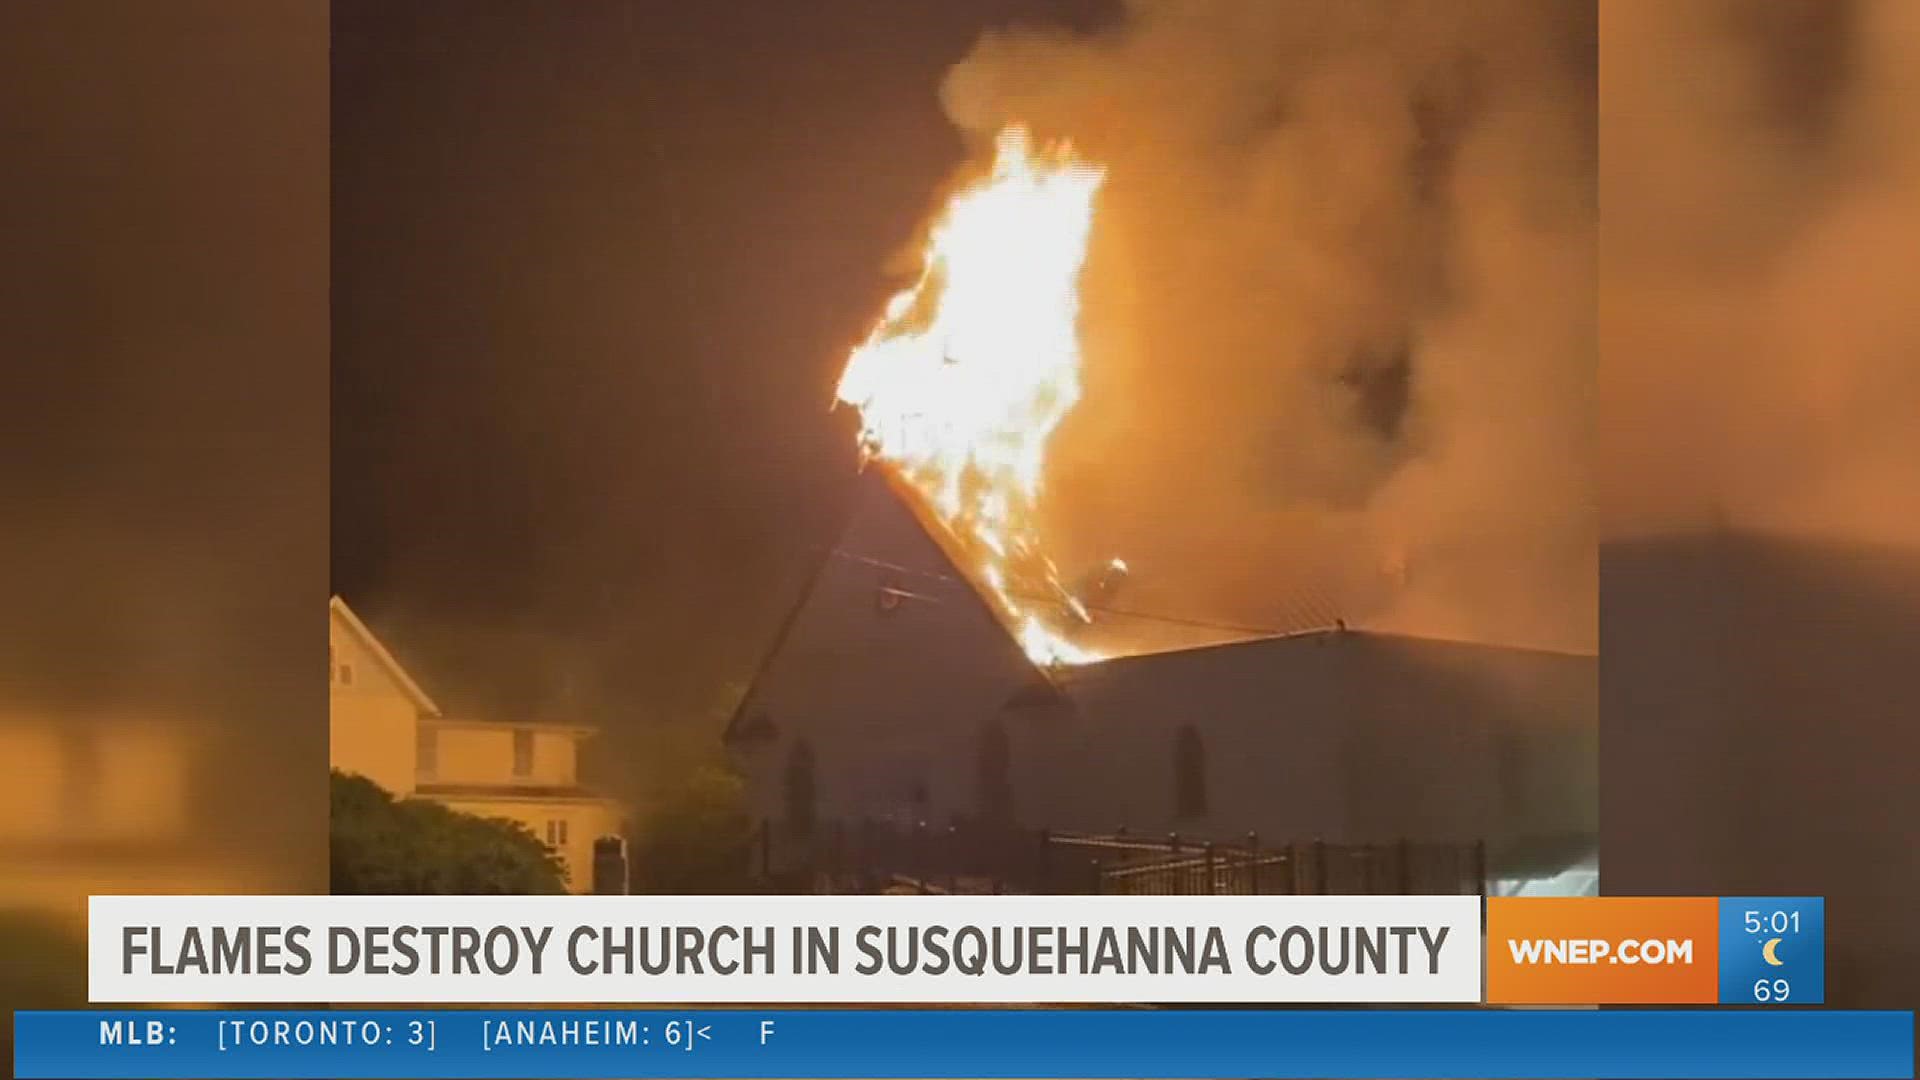 Neighbors believe the weather is to blame for a fire that destroyed a church in Susquehanna County.